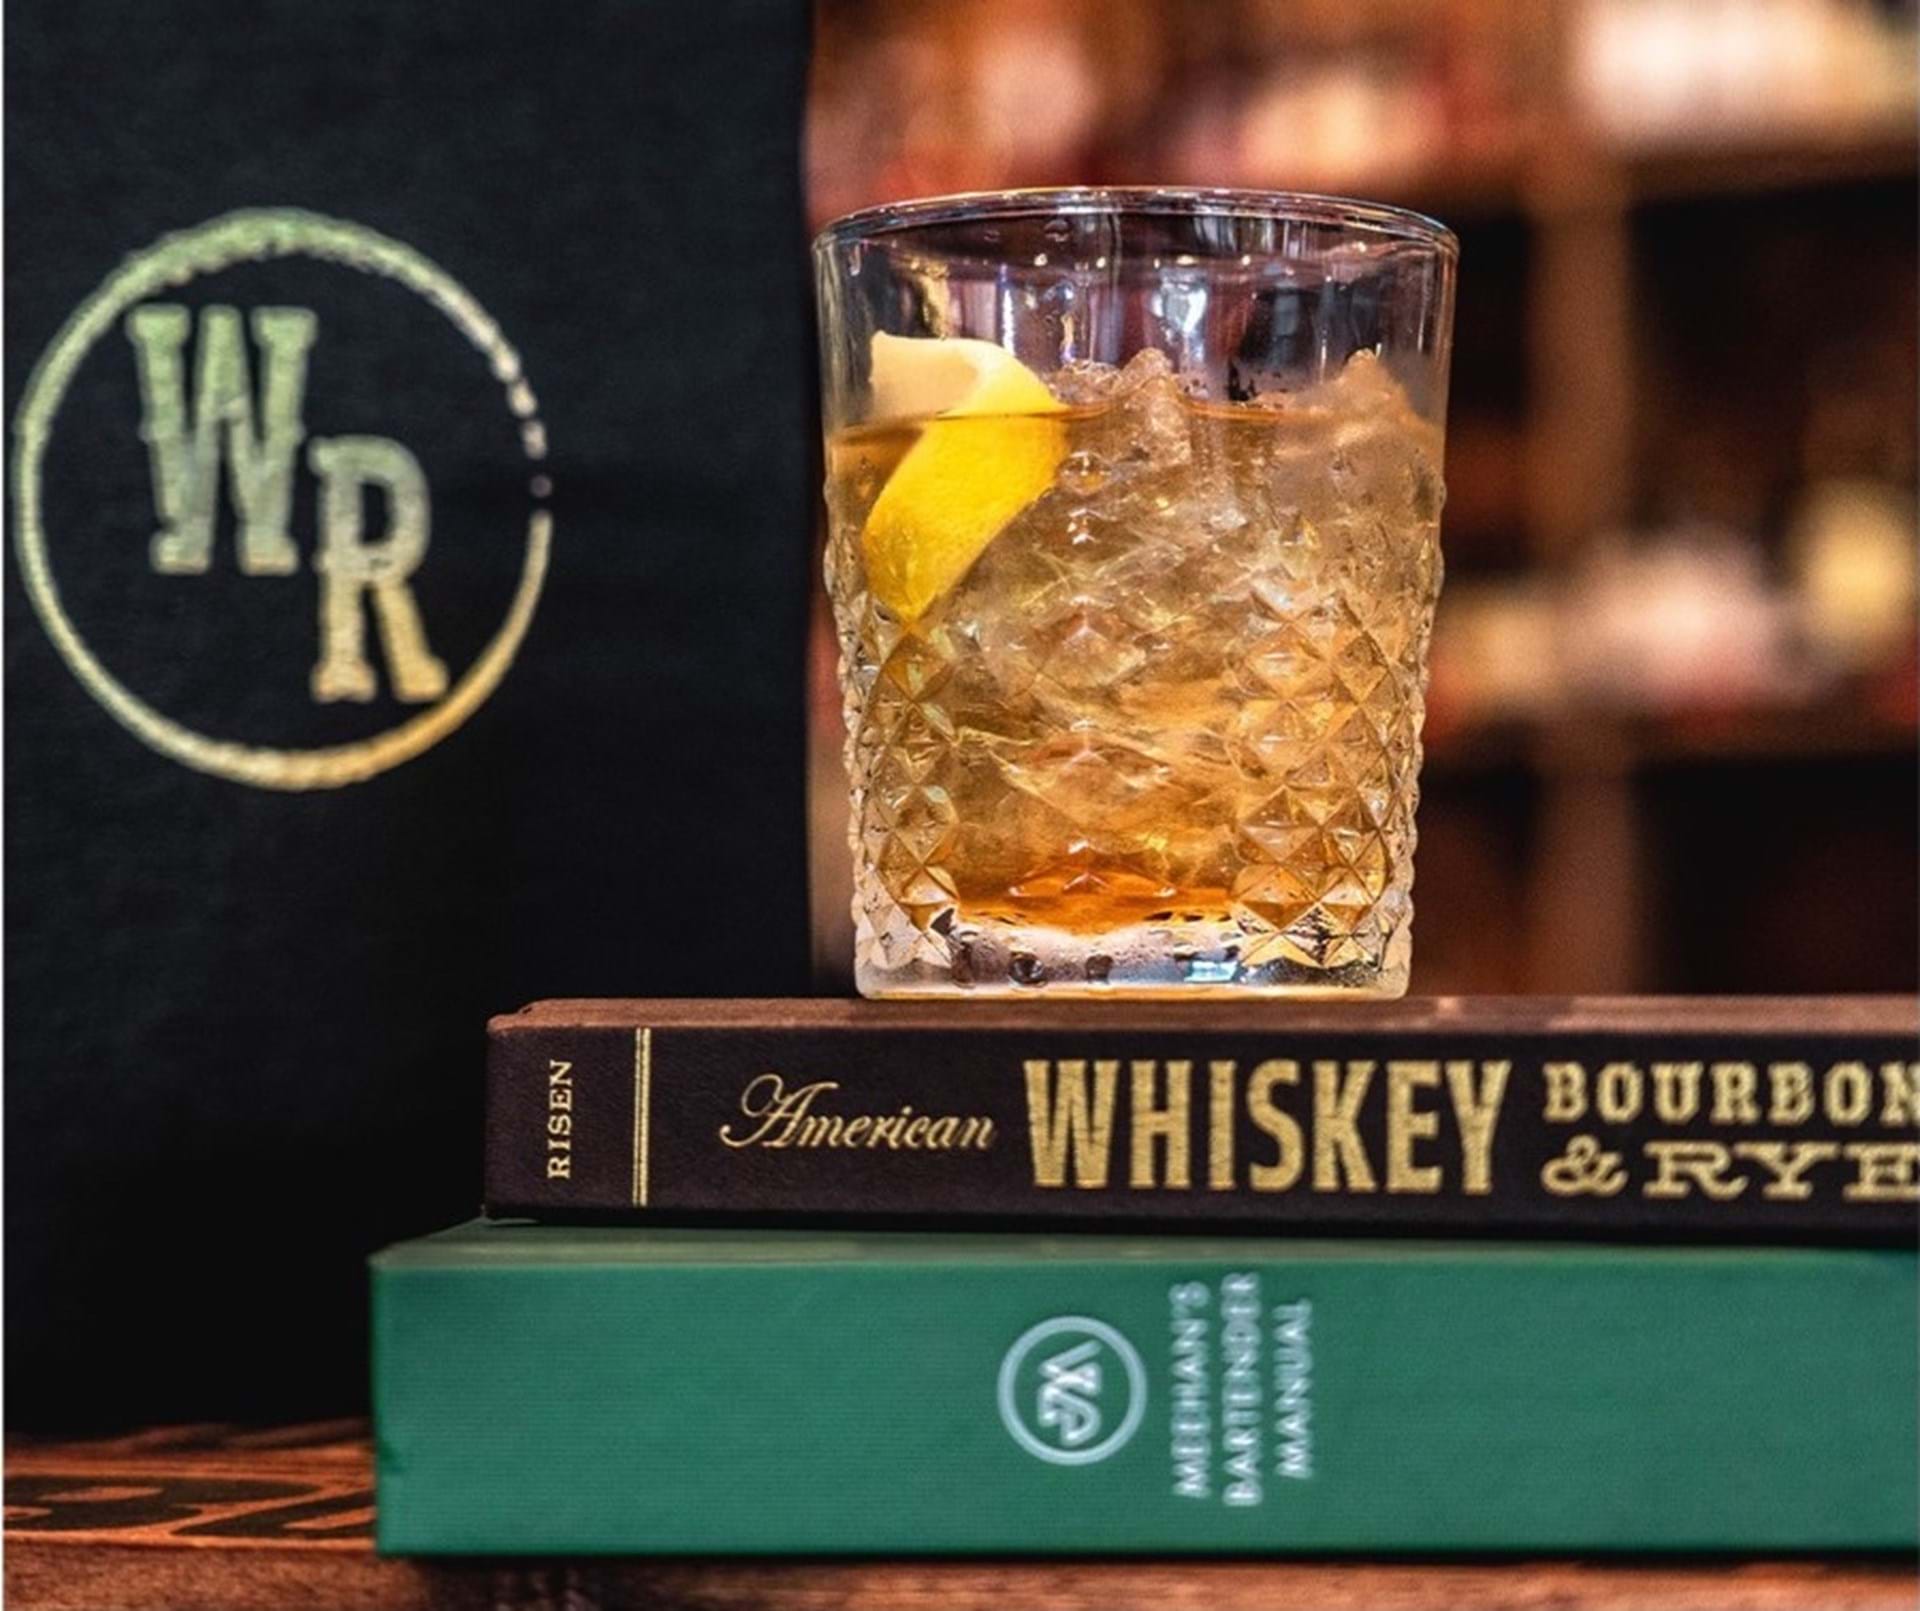 Whiskey and bourbon are staples at Whiskey Road.